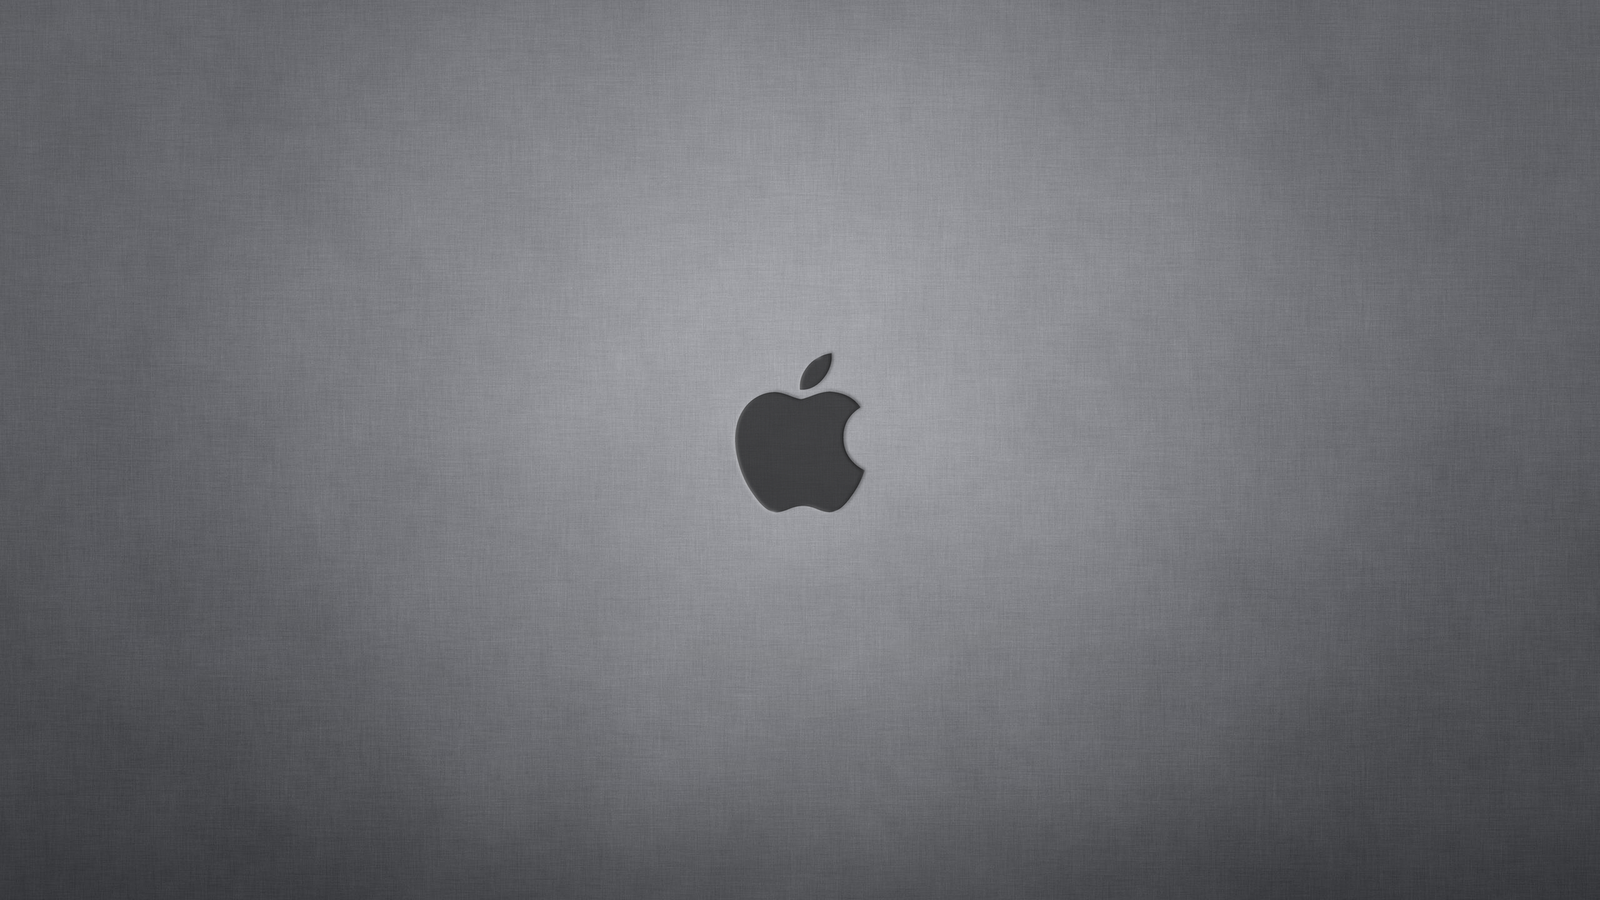 Mac Os Backgrounds - Wallpaper Cave